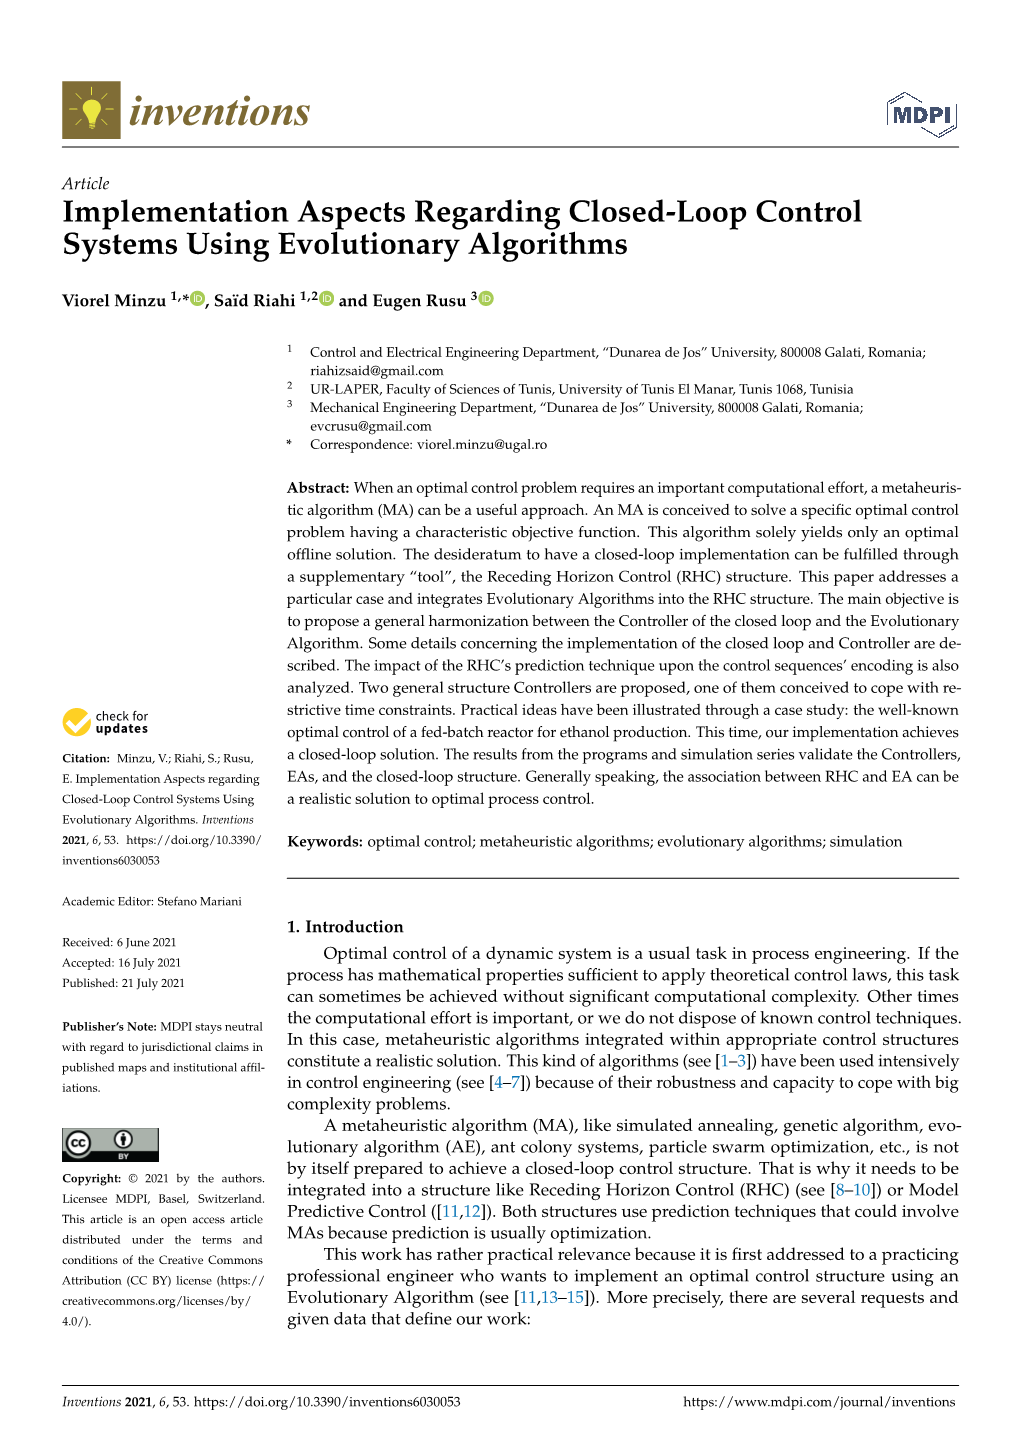 Implementation Aspects Regarding Closed-Loop Control Systems Using Evolutionary Algorithms